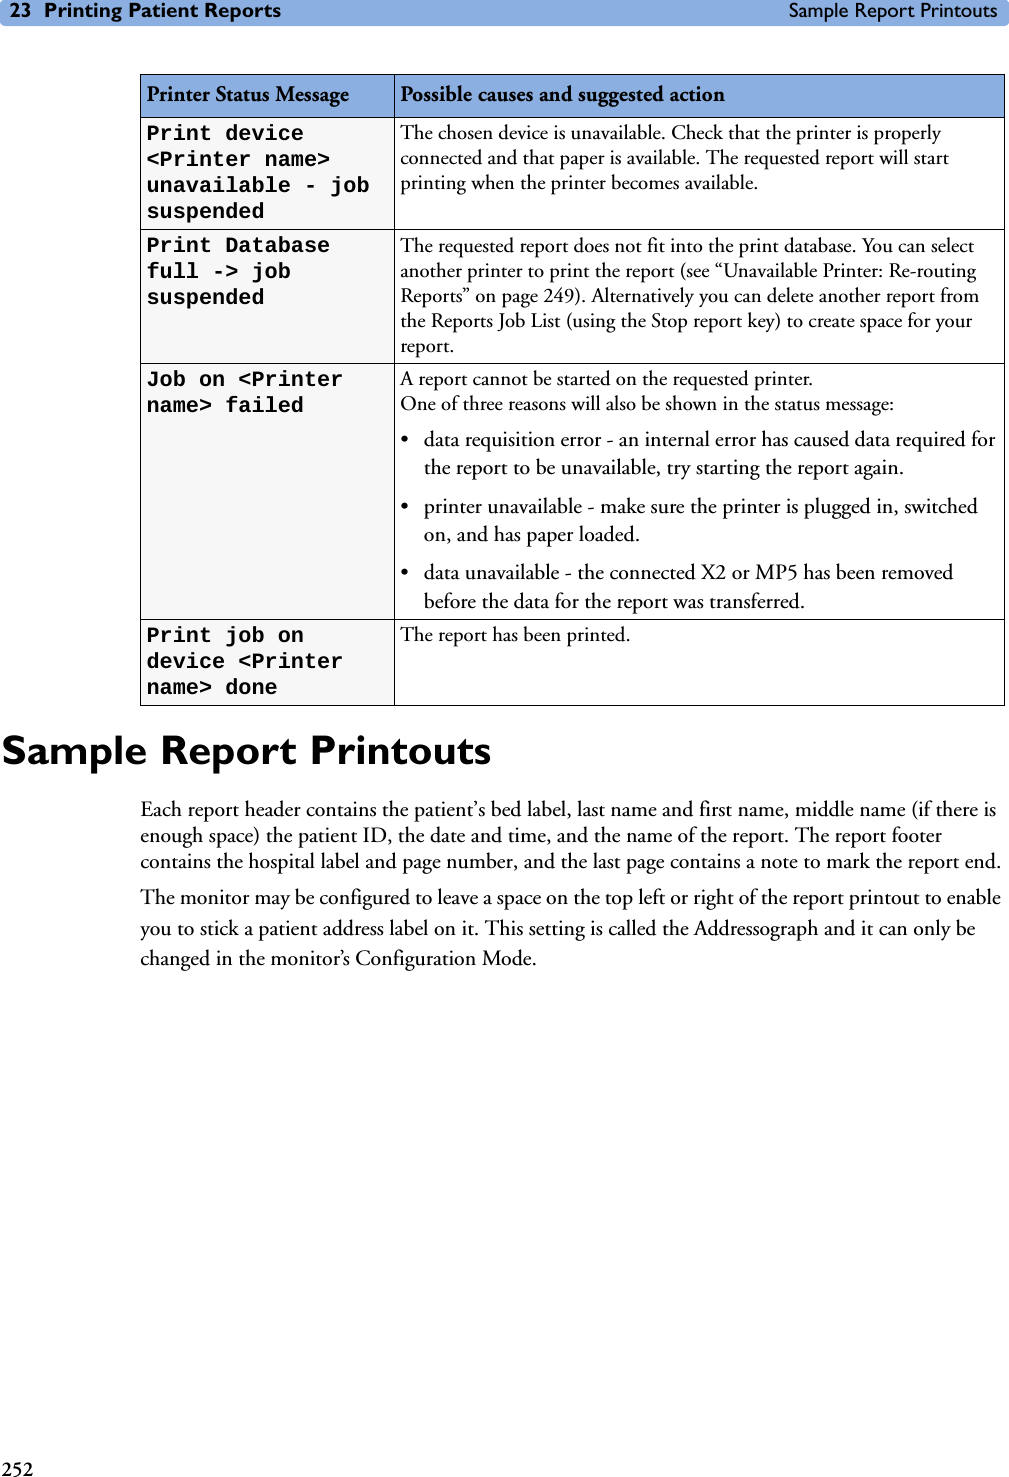 23 Printing Patient Reports Sample Report Printouts252Sample Report PrintoutsEach report header contains the patient’s bed label, last name and first name, middle name (if there is enough space) the patient ID, the date and time, and the name of the report. The report footer contains the hospital label and page number, and the last page contains a note to mark the report end.The monitor may be configured to leave a space on the top left or right of the report printout to enable you to stick a patient address label on it. This setting is called the Addressograph and it can only be changed in the monitor’s Configuration Mode.Print device &lt;Printer name&gt; unavailable - job suspendedThe chosen device is unavailable. Check that the printer is properly connected and that paper is available. The requested report will start printing when the printer becomes available.Print Database full -&gt; job suspendedThe requested report does not fit into the print database. You can select another printer to print the report (see “Unavailable Printer: Re-routing Reports” on page 249). Alternatively you can delete another report from the Reports Job List (using the Stop report key) to create space for your report. Job on &lt;Printer name&gt; failed A report cannot be started on the requested printer. One of three reasons will also be shown in the status message: • data requisition error - an internal error has caused data required for the report to be unavailable, try starting the report again.• printer unavailable - make sure the printer is plugged in, switched on, and has paper loaded. • data unavailable - the connected X2 or MP5 has been removed before the data for the report was transferred.Print job on device &lt;Printer name&gt; doneThe report has been printed. Printer Status Message Possible causes and suggested action